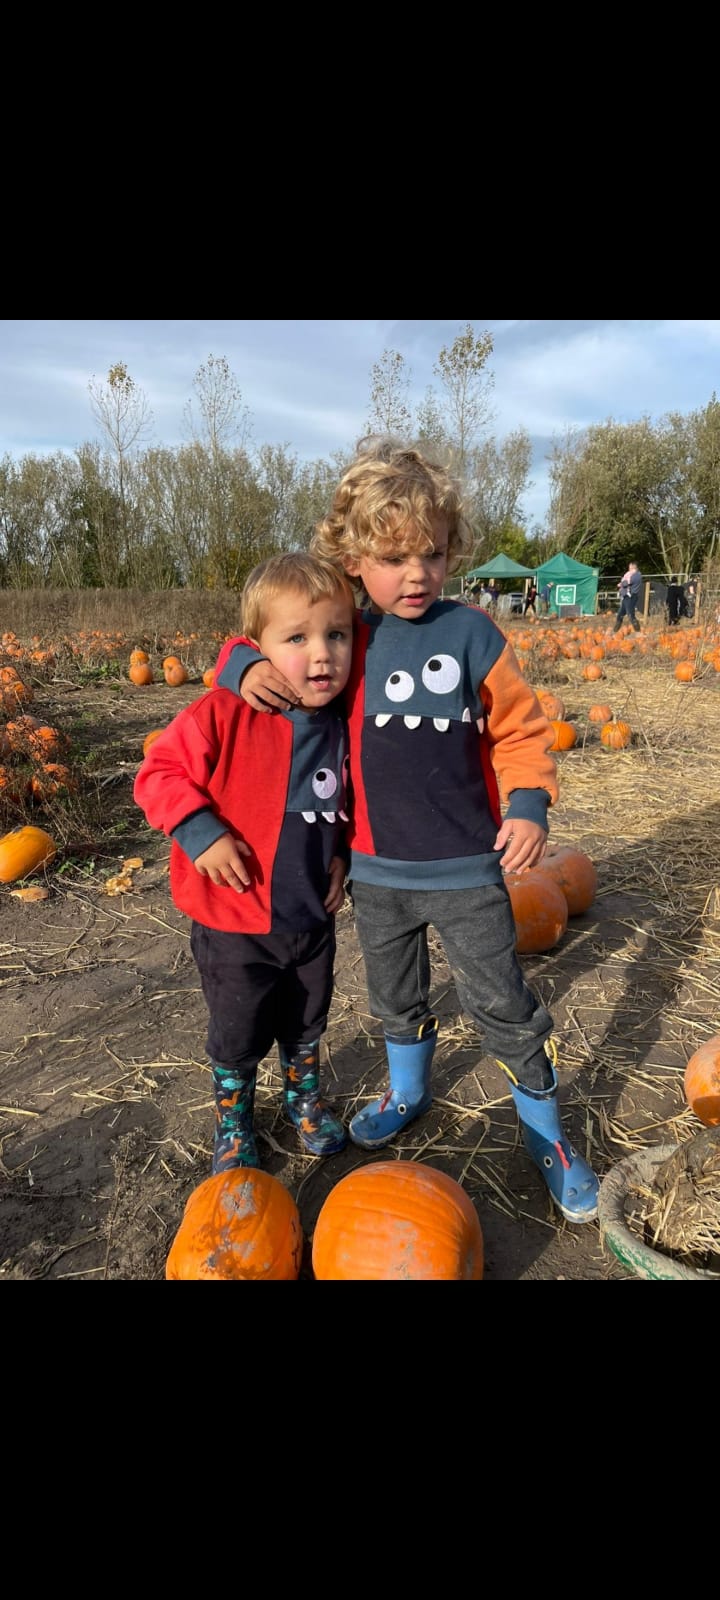 A lovely picture of brotherly love - my two youngest grandsons, ages three and four standing in a field of pumpkins, trying to decide which to take home. The older has his arm round the other’s neck pulling him towards him as if saying”Now concentrate Maxey, which one shall we have?”